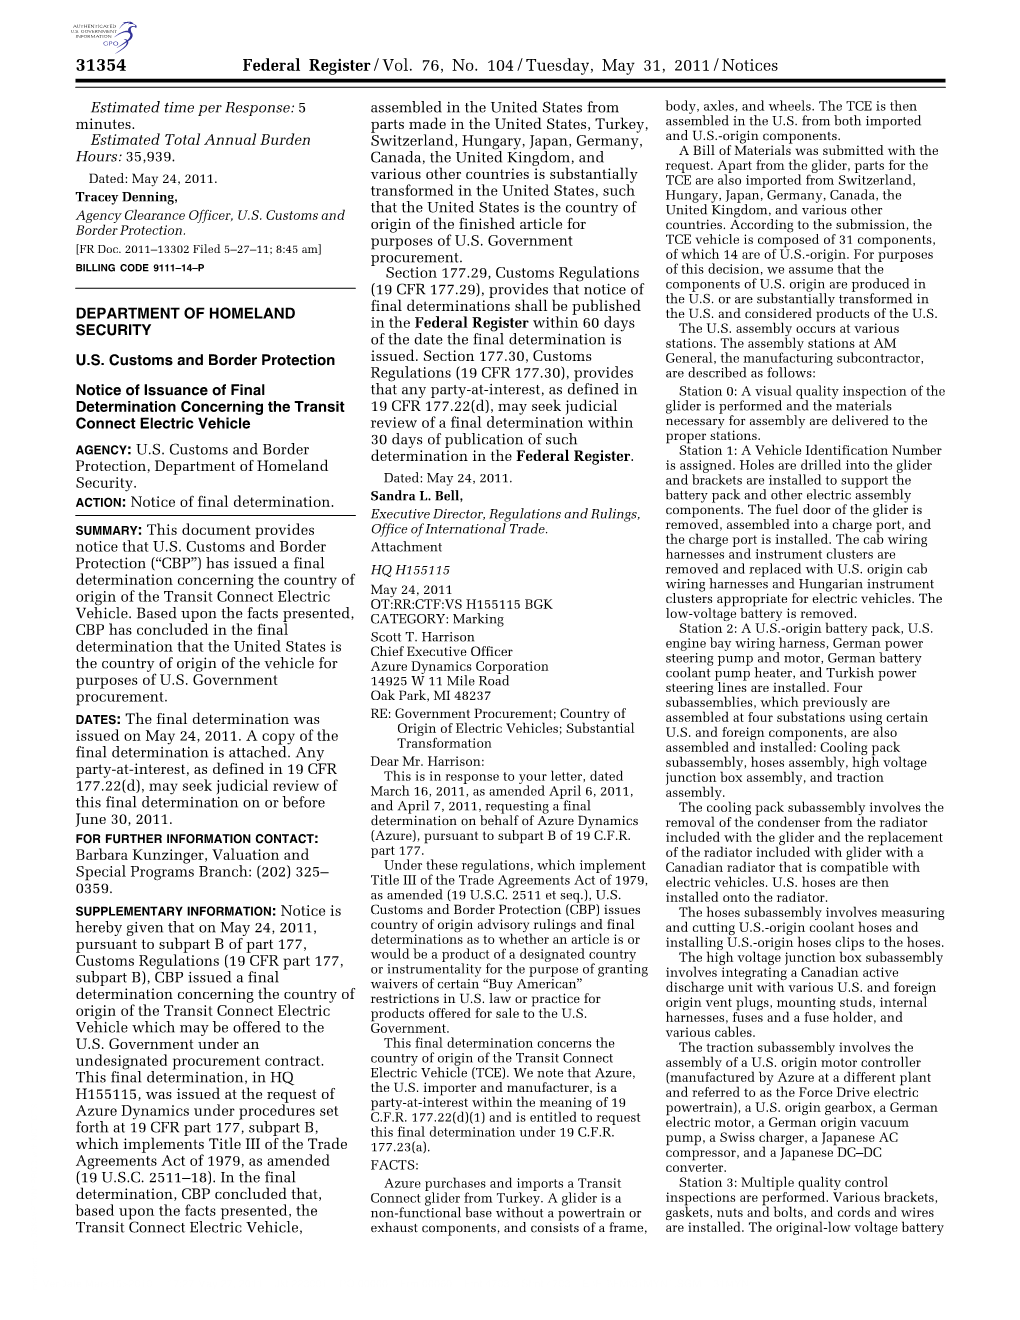 Federal Register/Vol. 76, No. 104/Tuesday, May 31, 2011/Notices